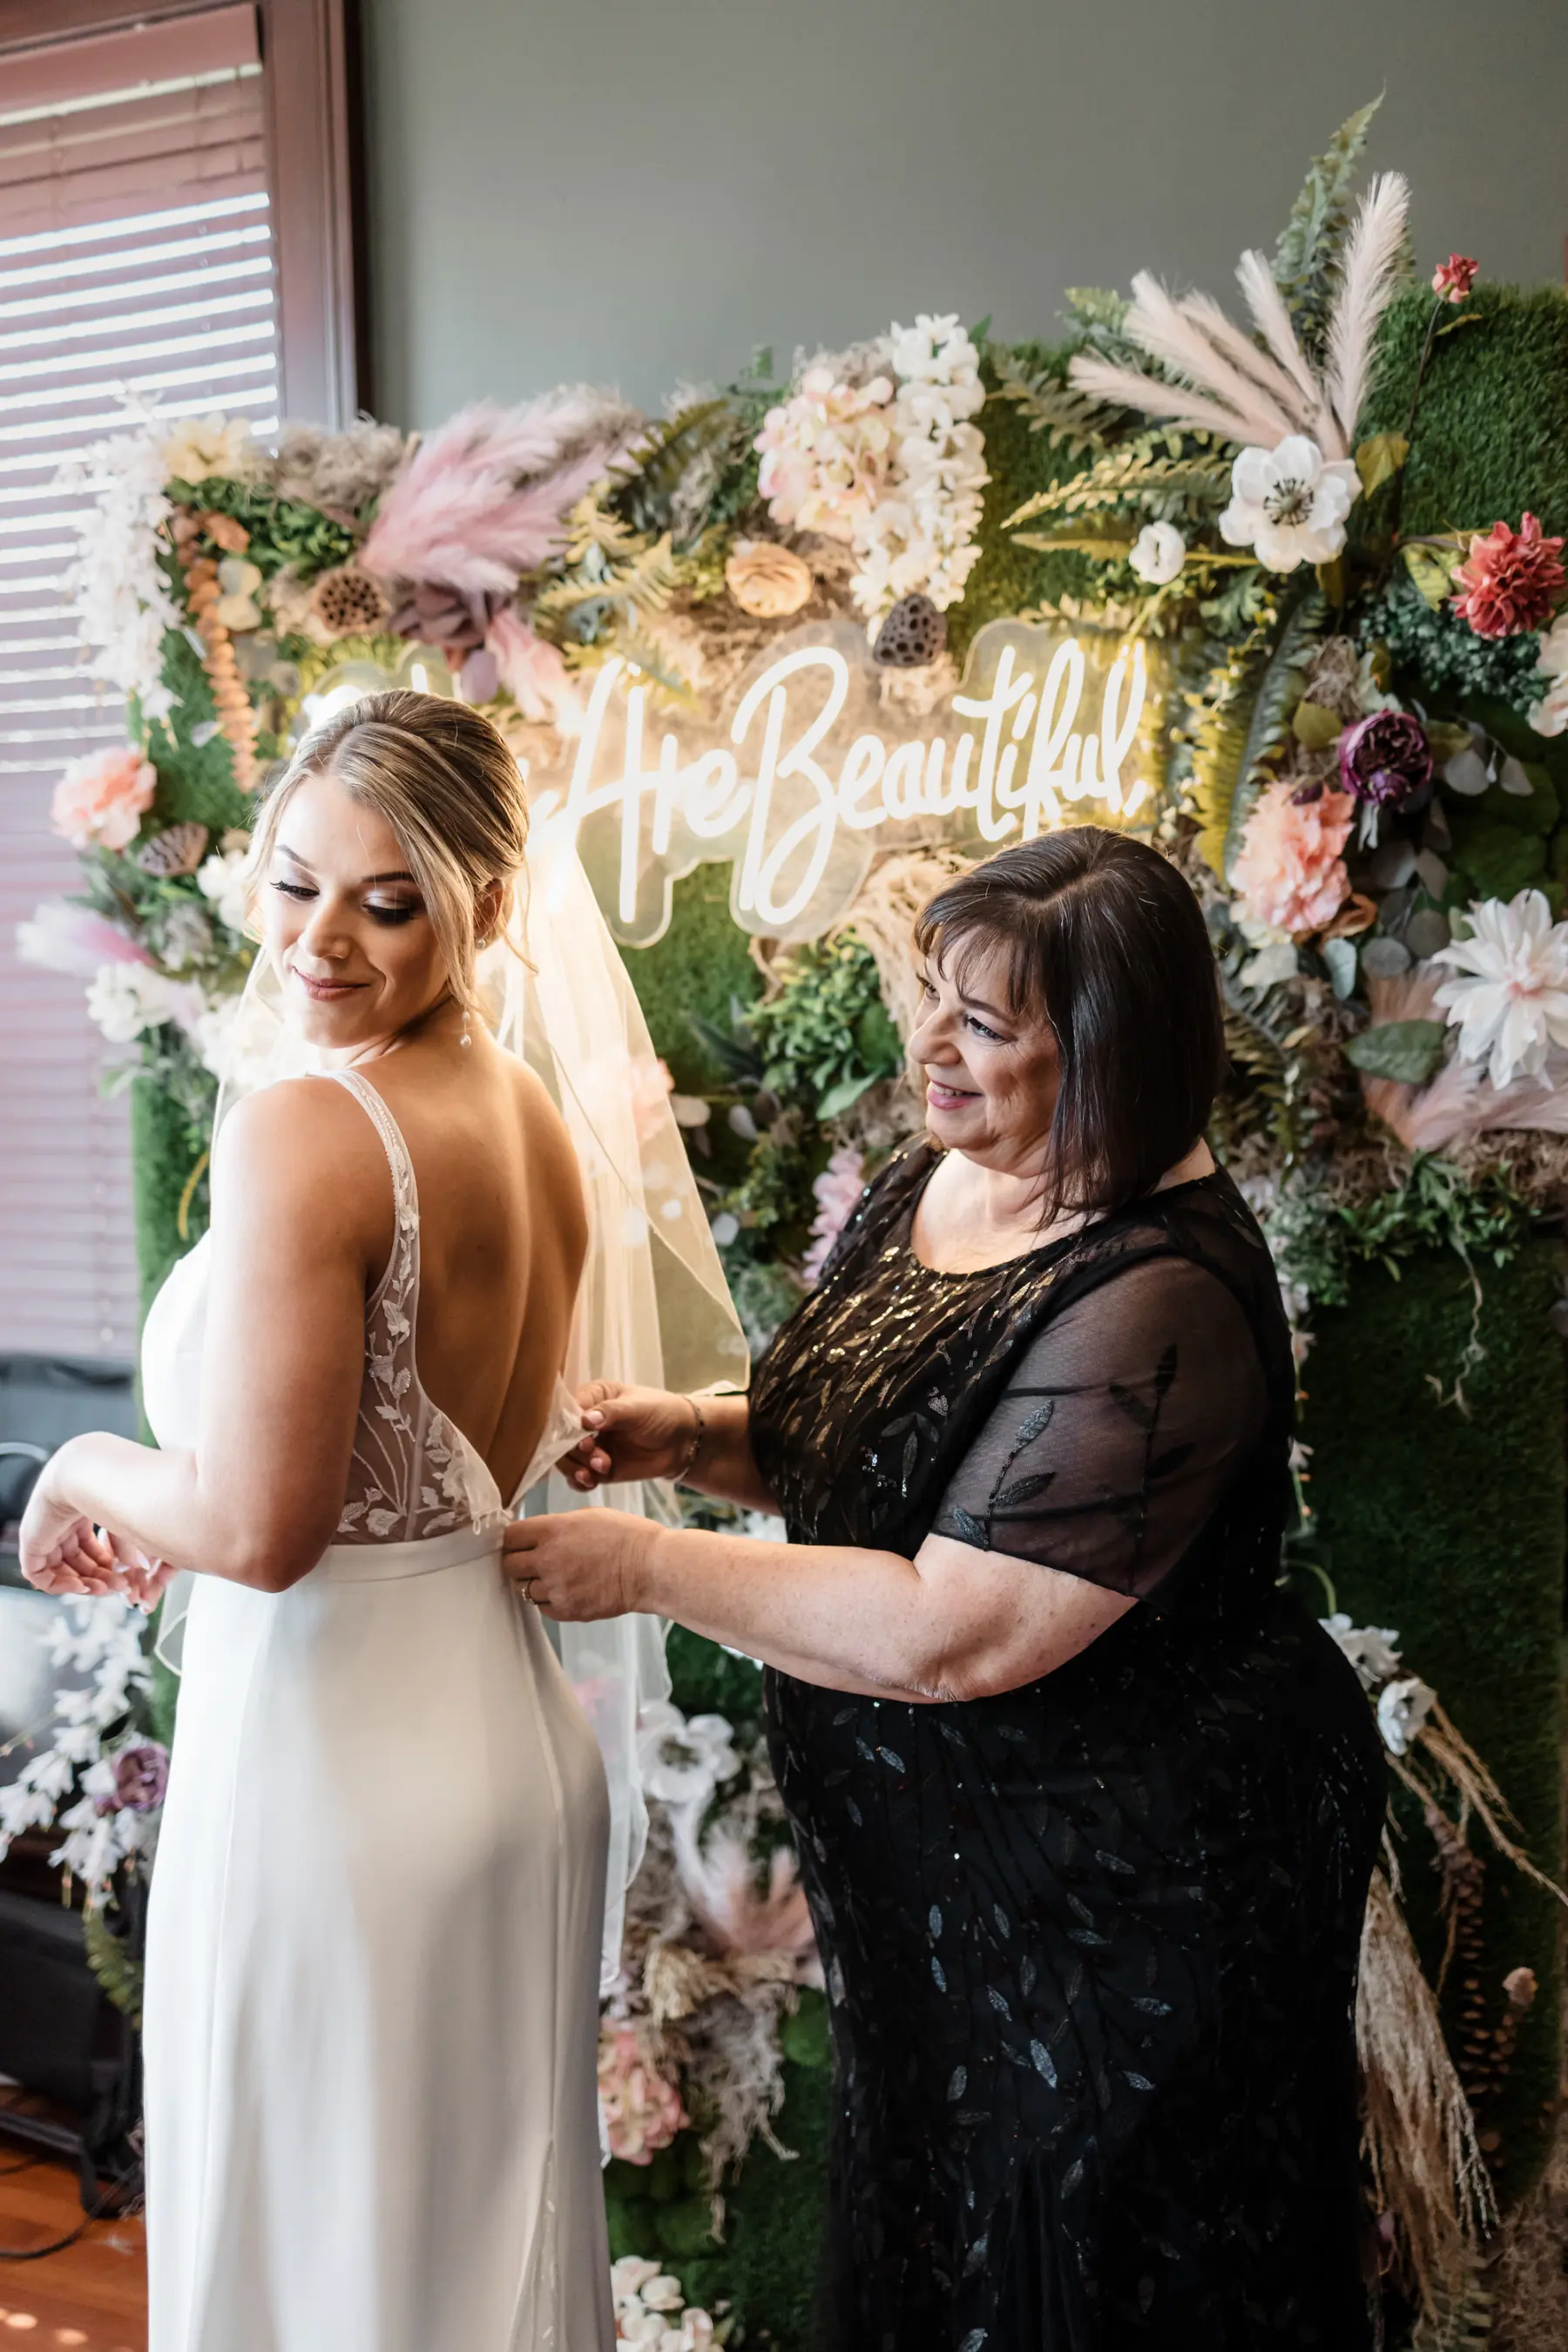 Bride and Mother Getting Ready Wedding Portrait | Black Mother of the Bride Dress Ideas | Classic White Open Back Lace Fit and Flare Square Neck Alexandra Grecco Wedding Dress with Side Slit Inspiration | Tampa Bay Hair and Makeup Artist Adore Bridal Services